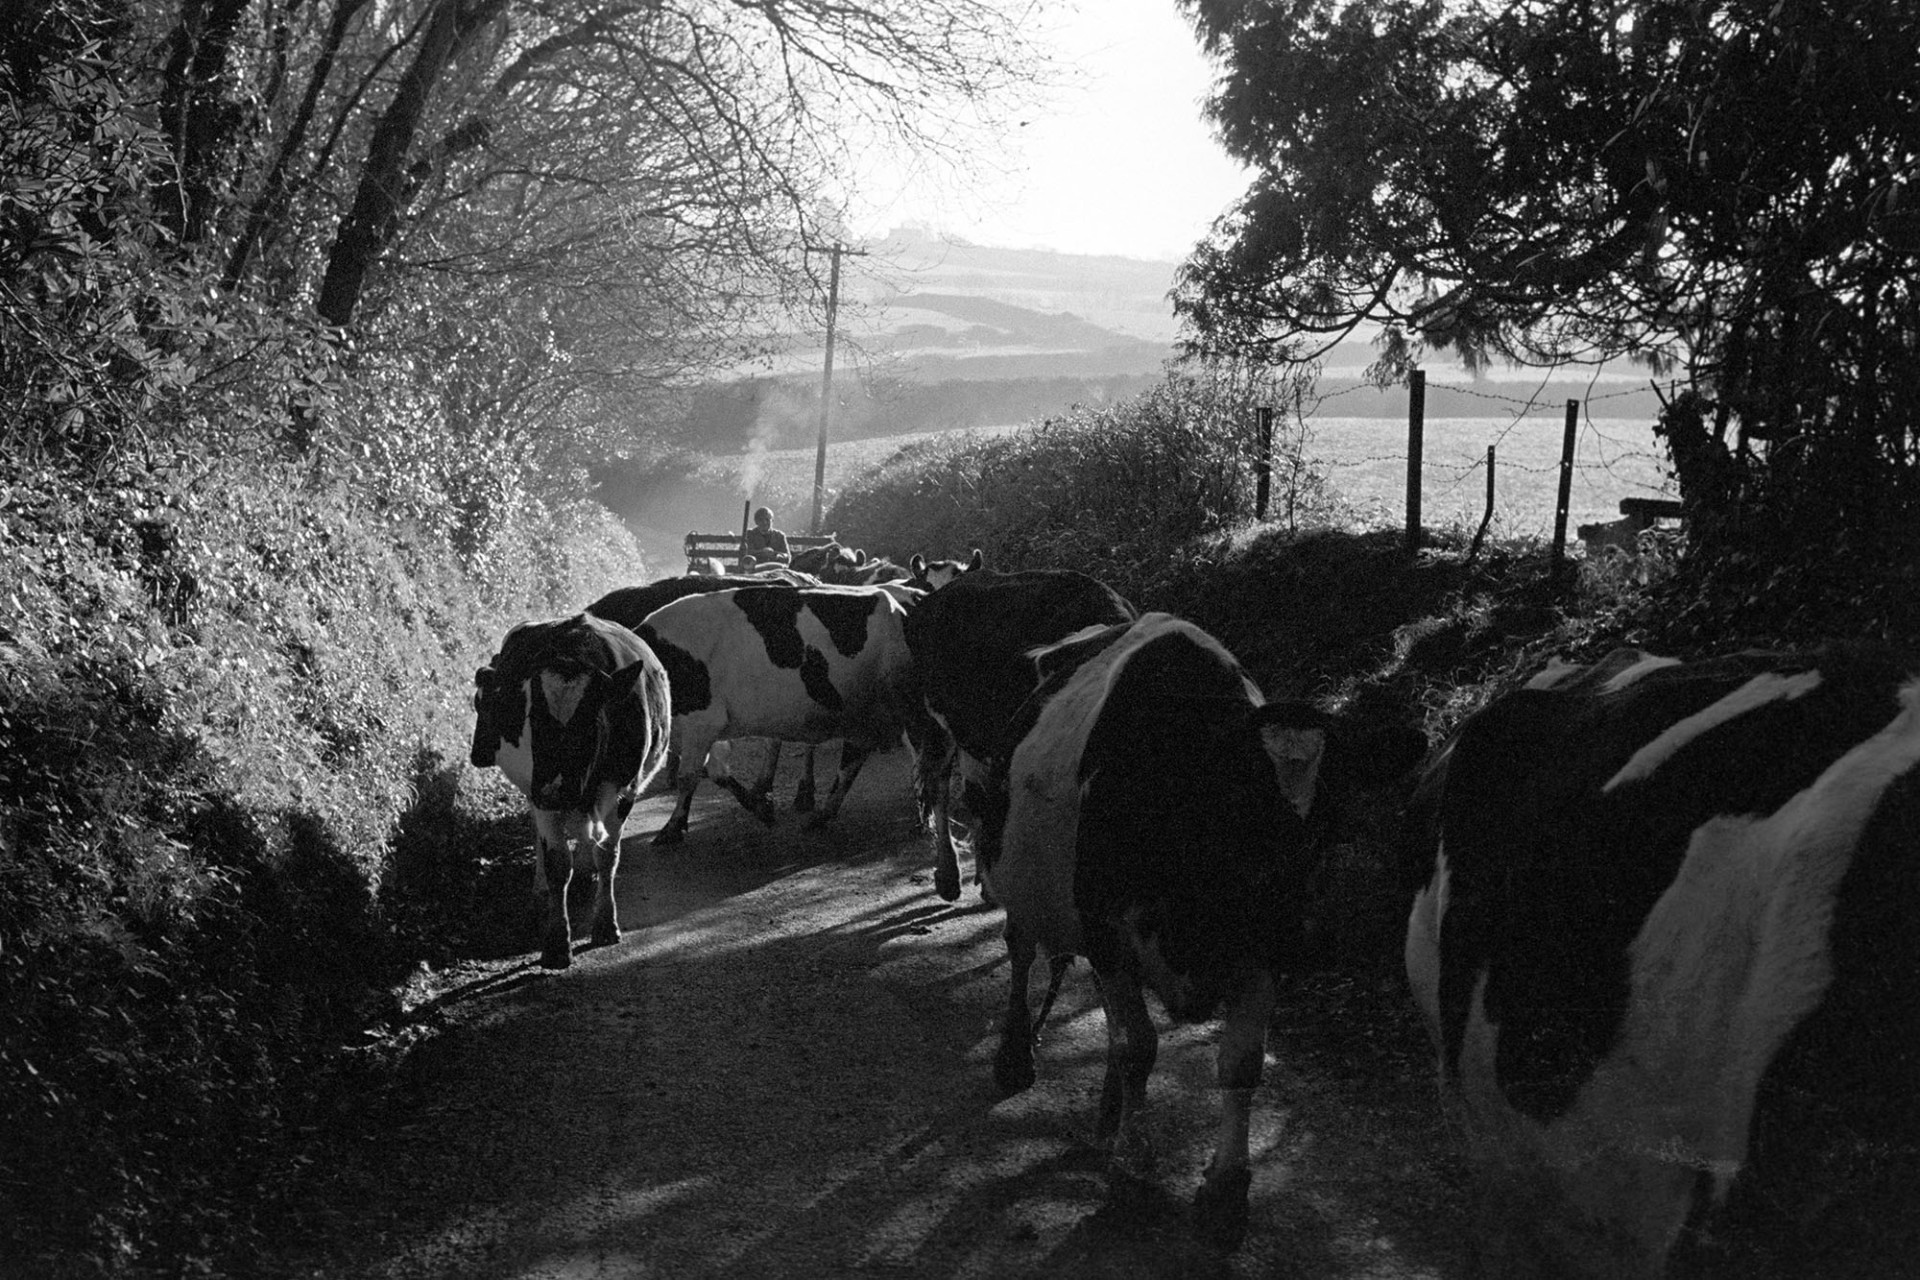 Cows following tractor going to be milked.
[Frank Pickard driving a tractor and leading cows along a lane to be milked at Woolridge, Dolton.]